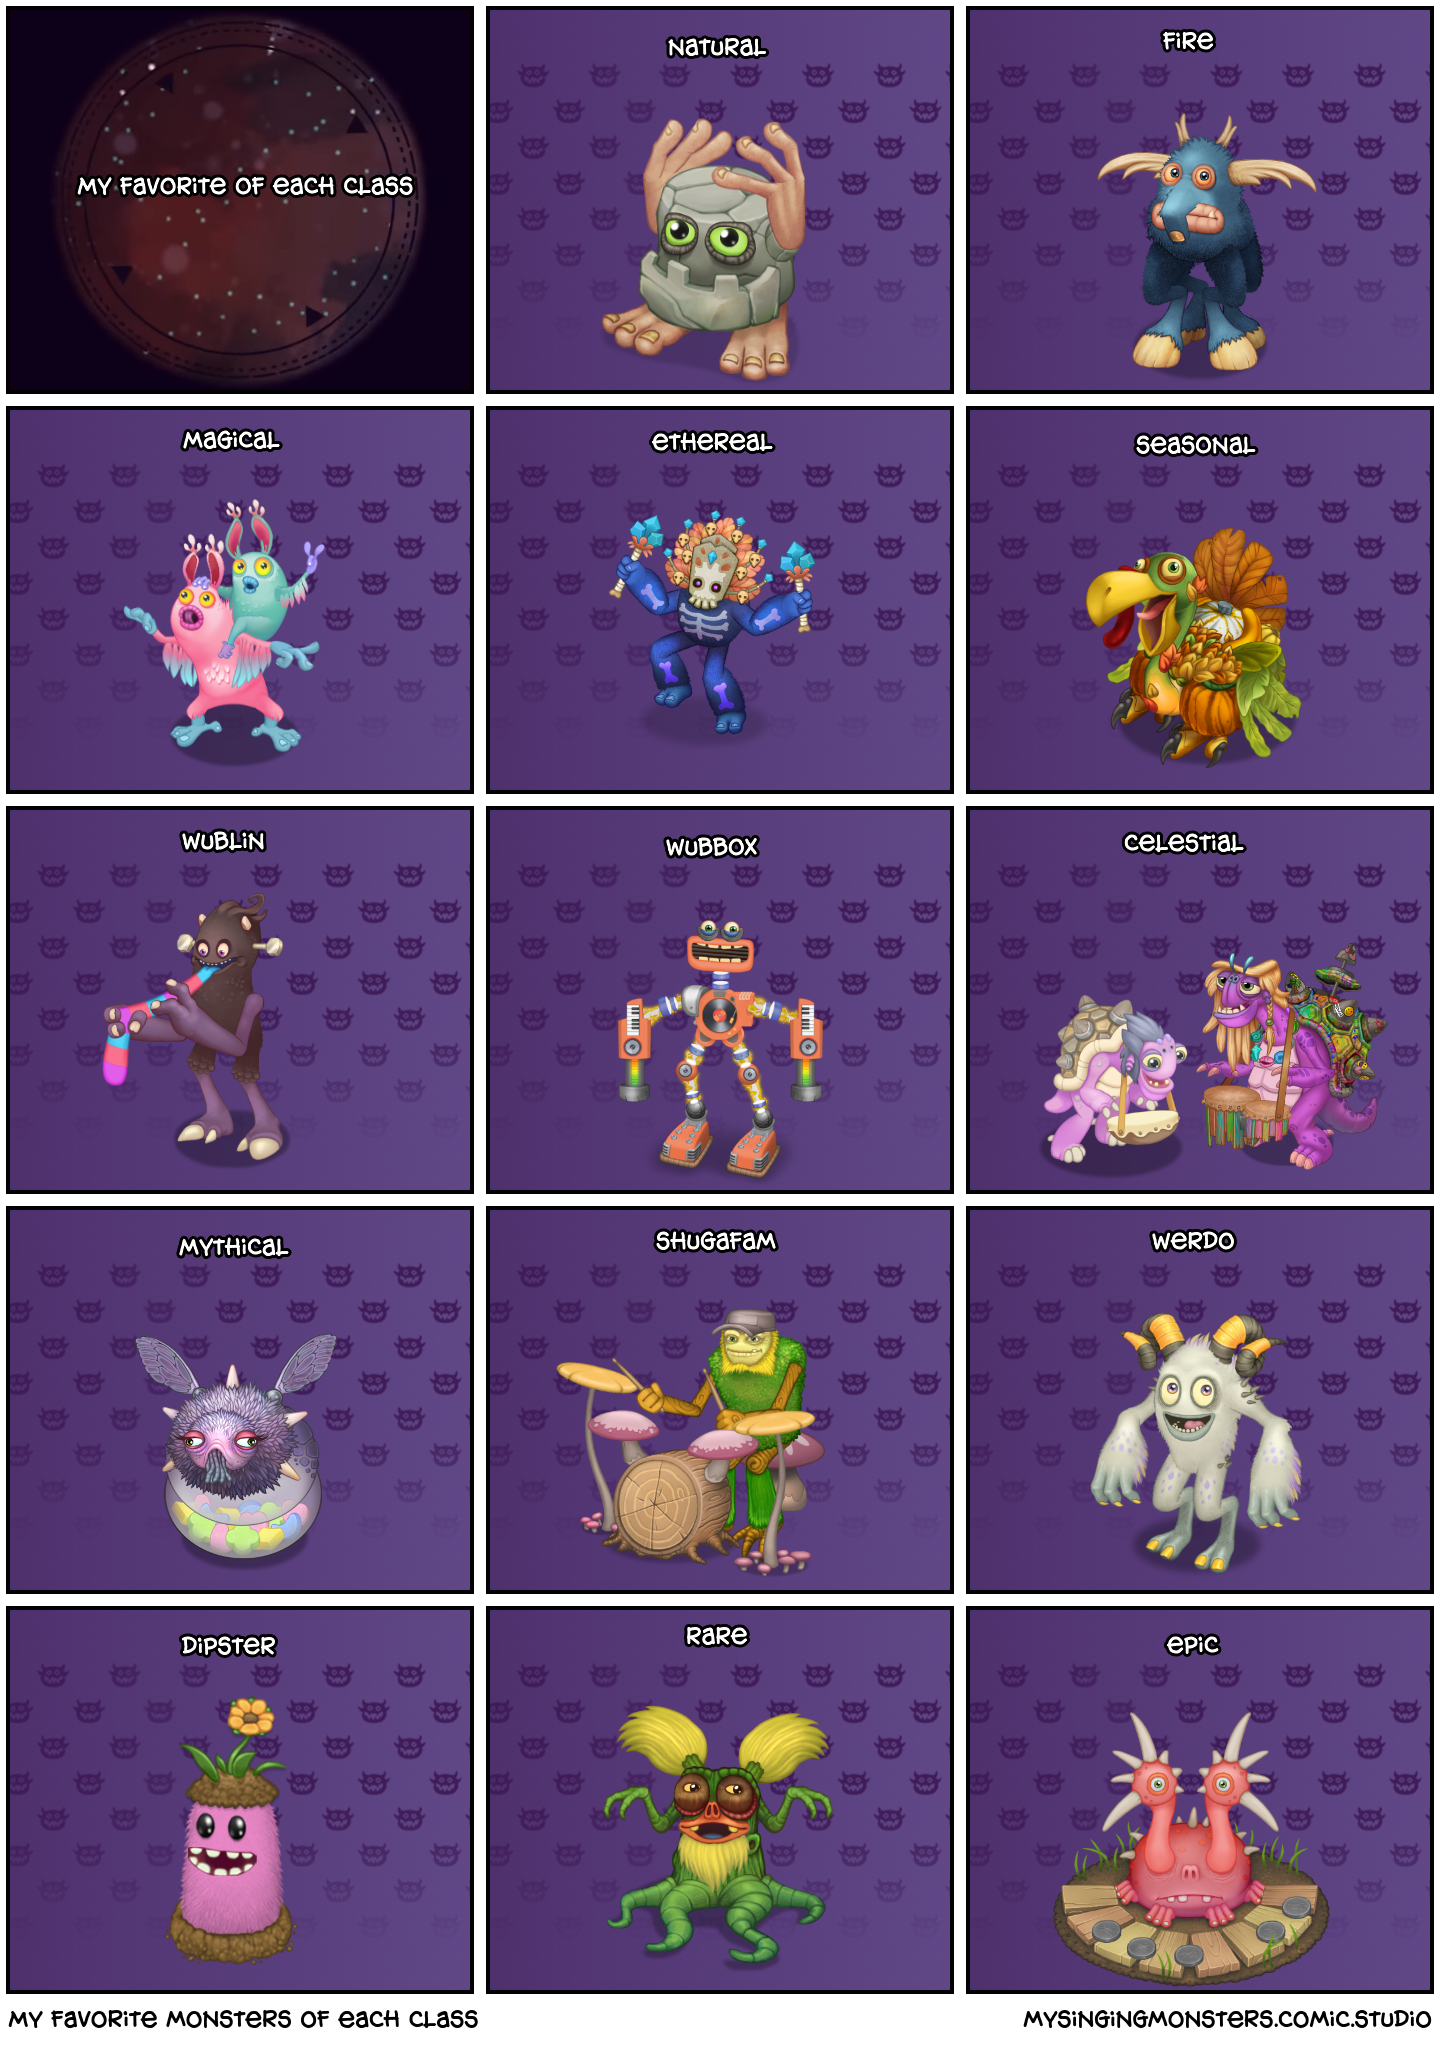 My favorite monsters of each class